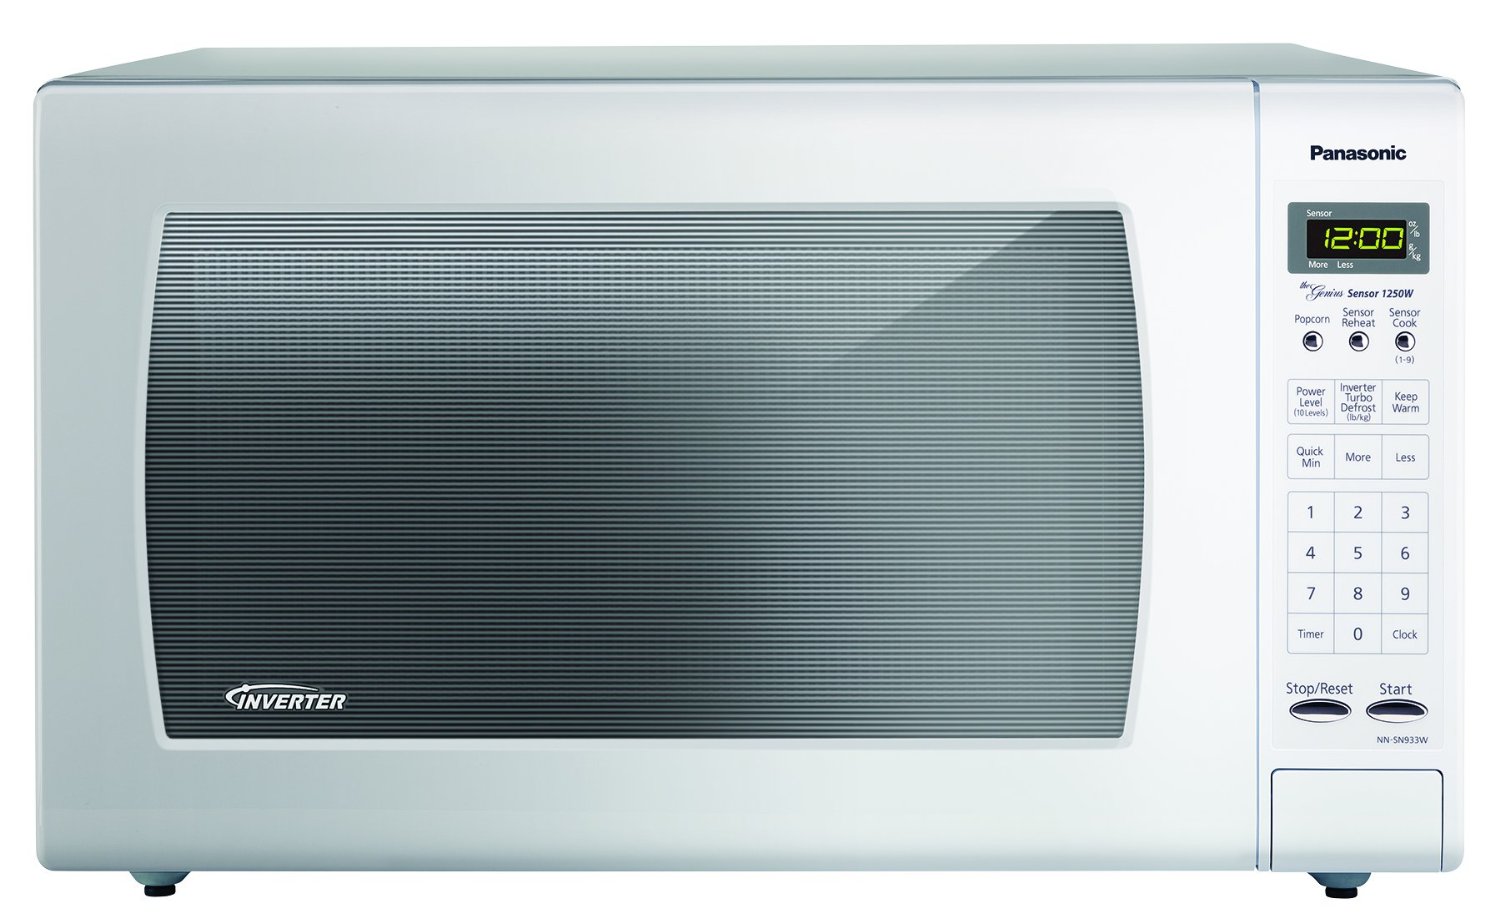 Panasonic NN-SN933W White 1250W 2.2 Cu. Ft. Countertop Microwave Oven with Inverter Technology